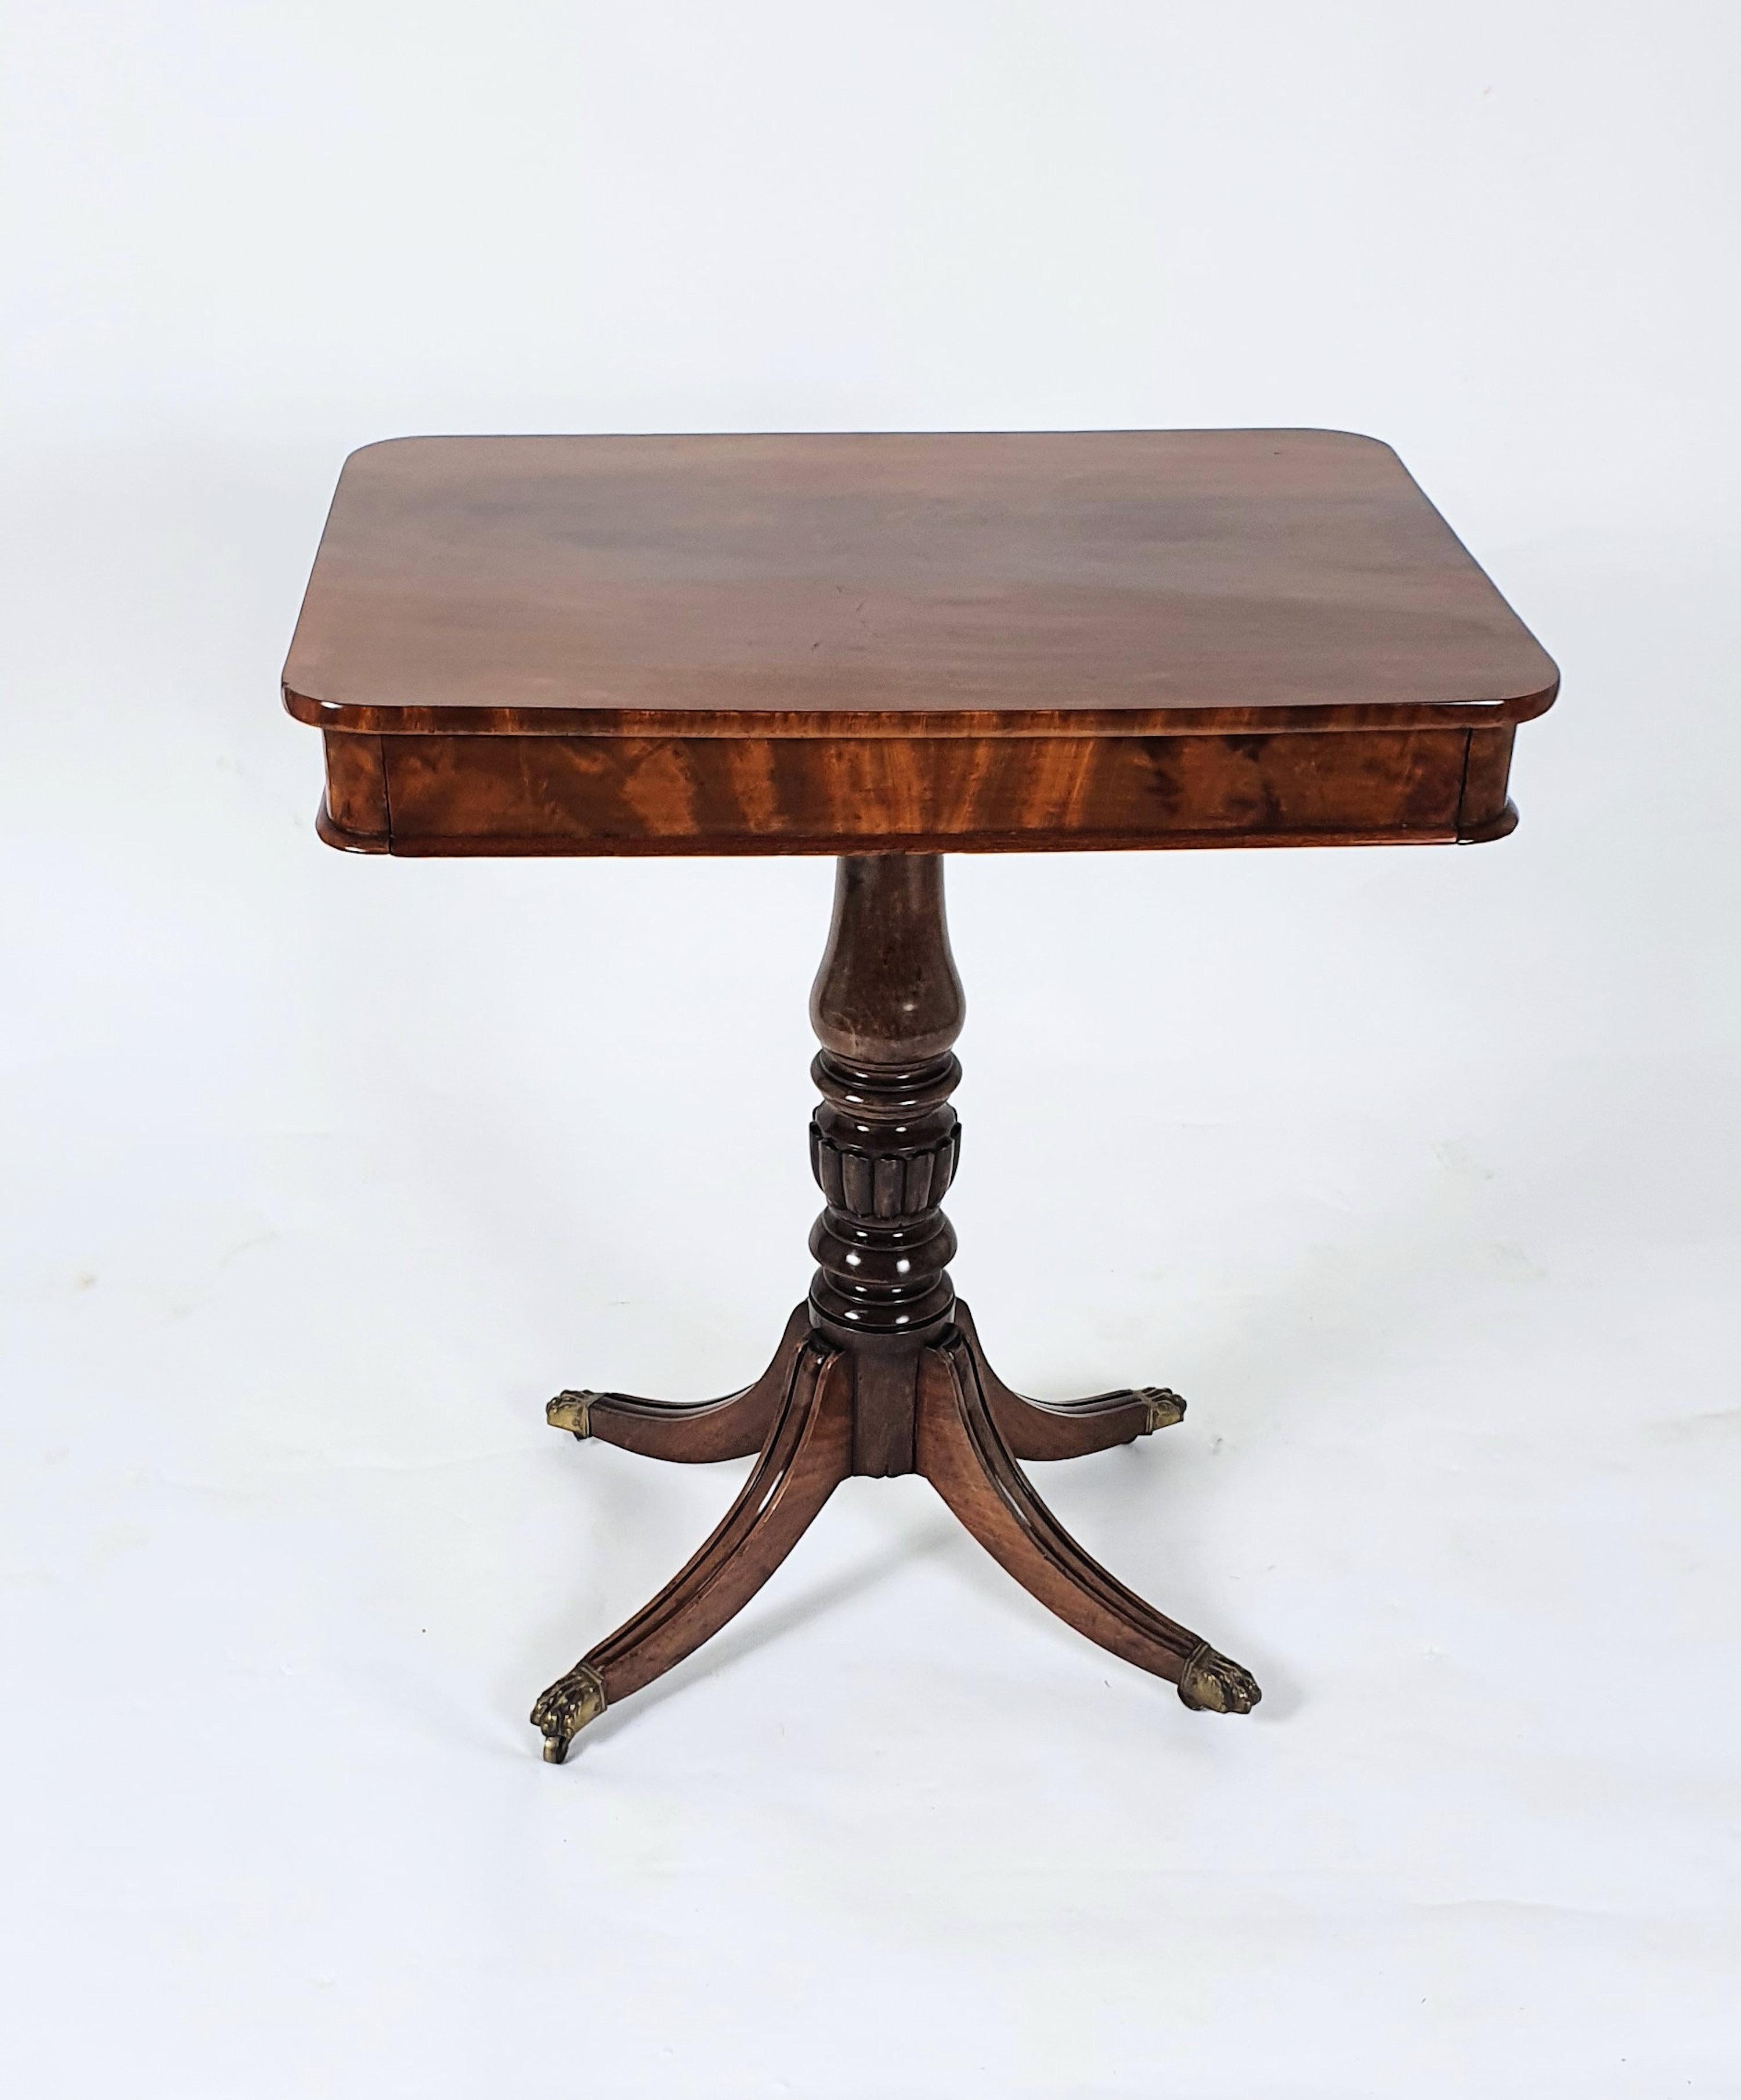 This early 19th century mahogany centre table features a frieze drawer and stands on a turned and fluted column with 4 reeded splay supports and original brass lions paw castors. It measures: 25 ½ in, 64.7 cm wide, 19 in, 48.3 cm deep and 28 ½, 72.4